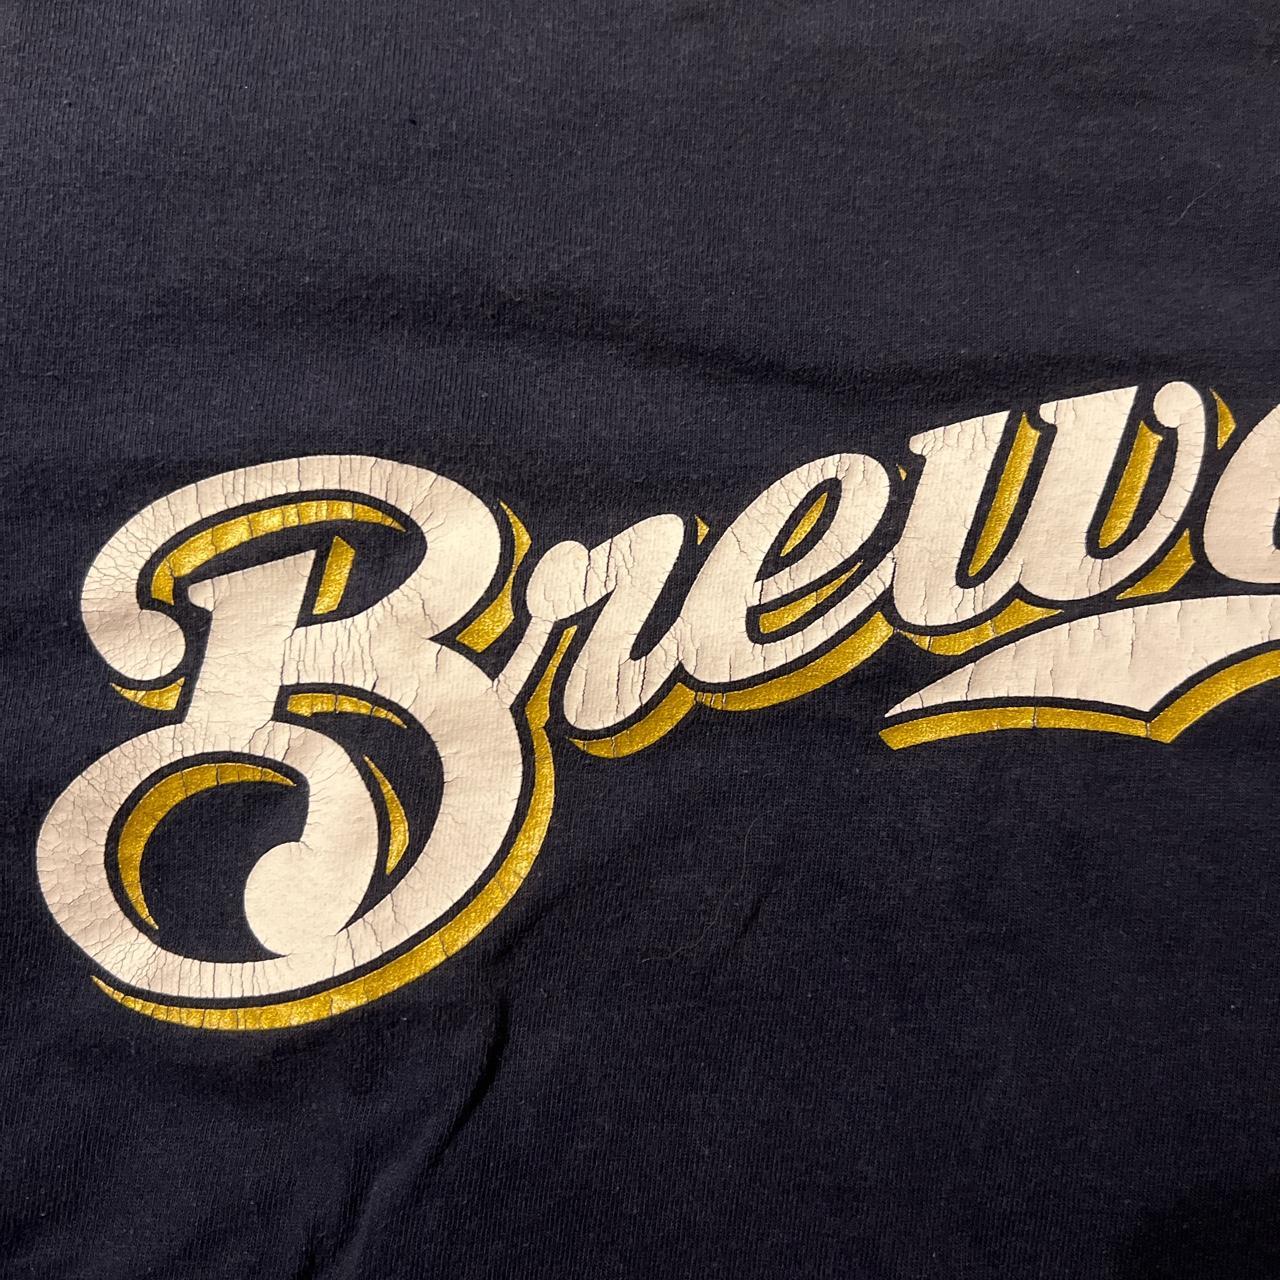 Milwaukee Brewers Prince Fielder T Shirt by Majestic